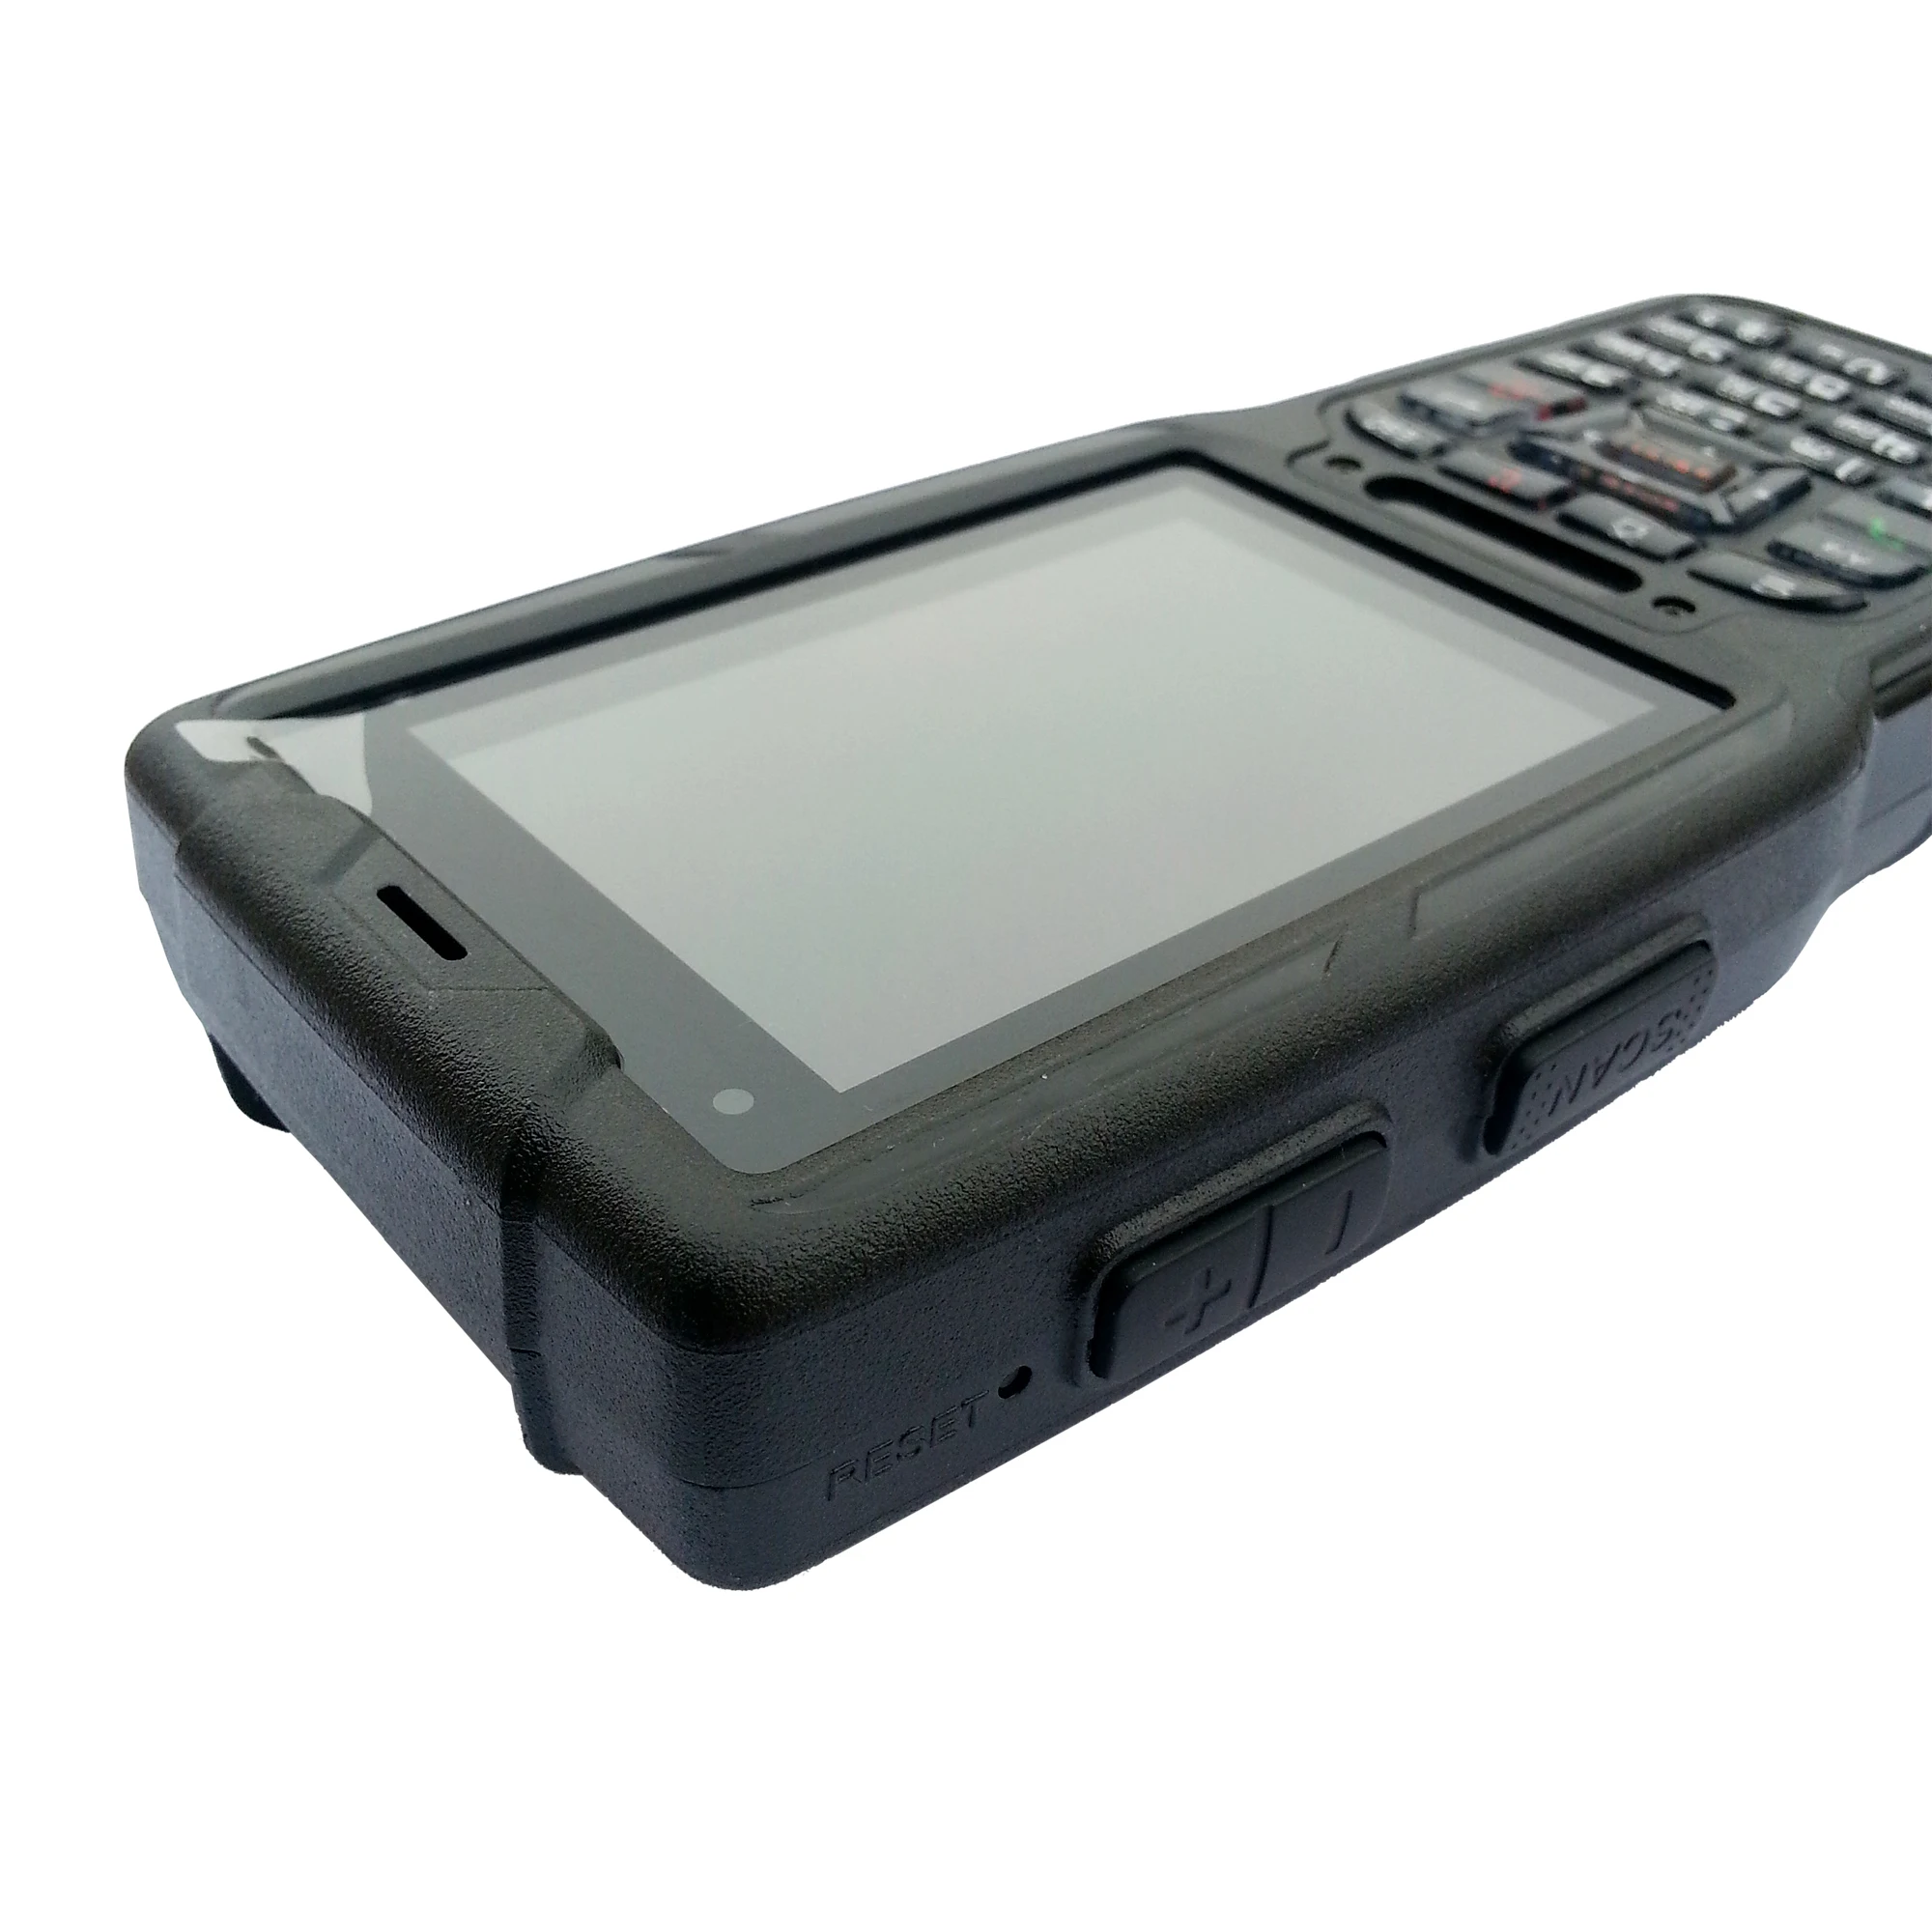 Factory Rugged Android Handheld Mobile Terminal Pda 1d 2d Qr Barcode Scanner With WiFi 4G Camera Keyboard Pdas